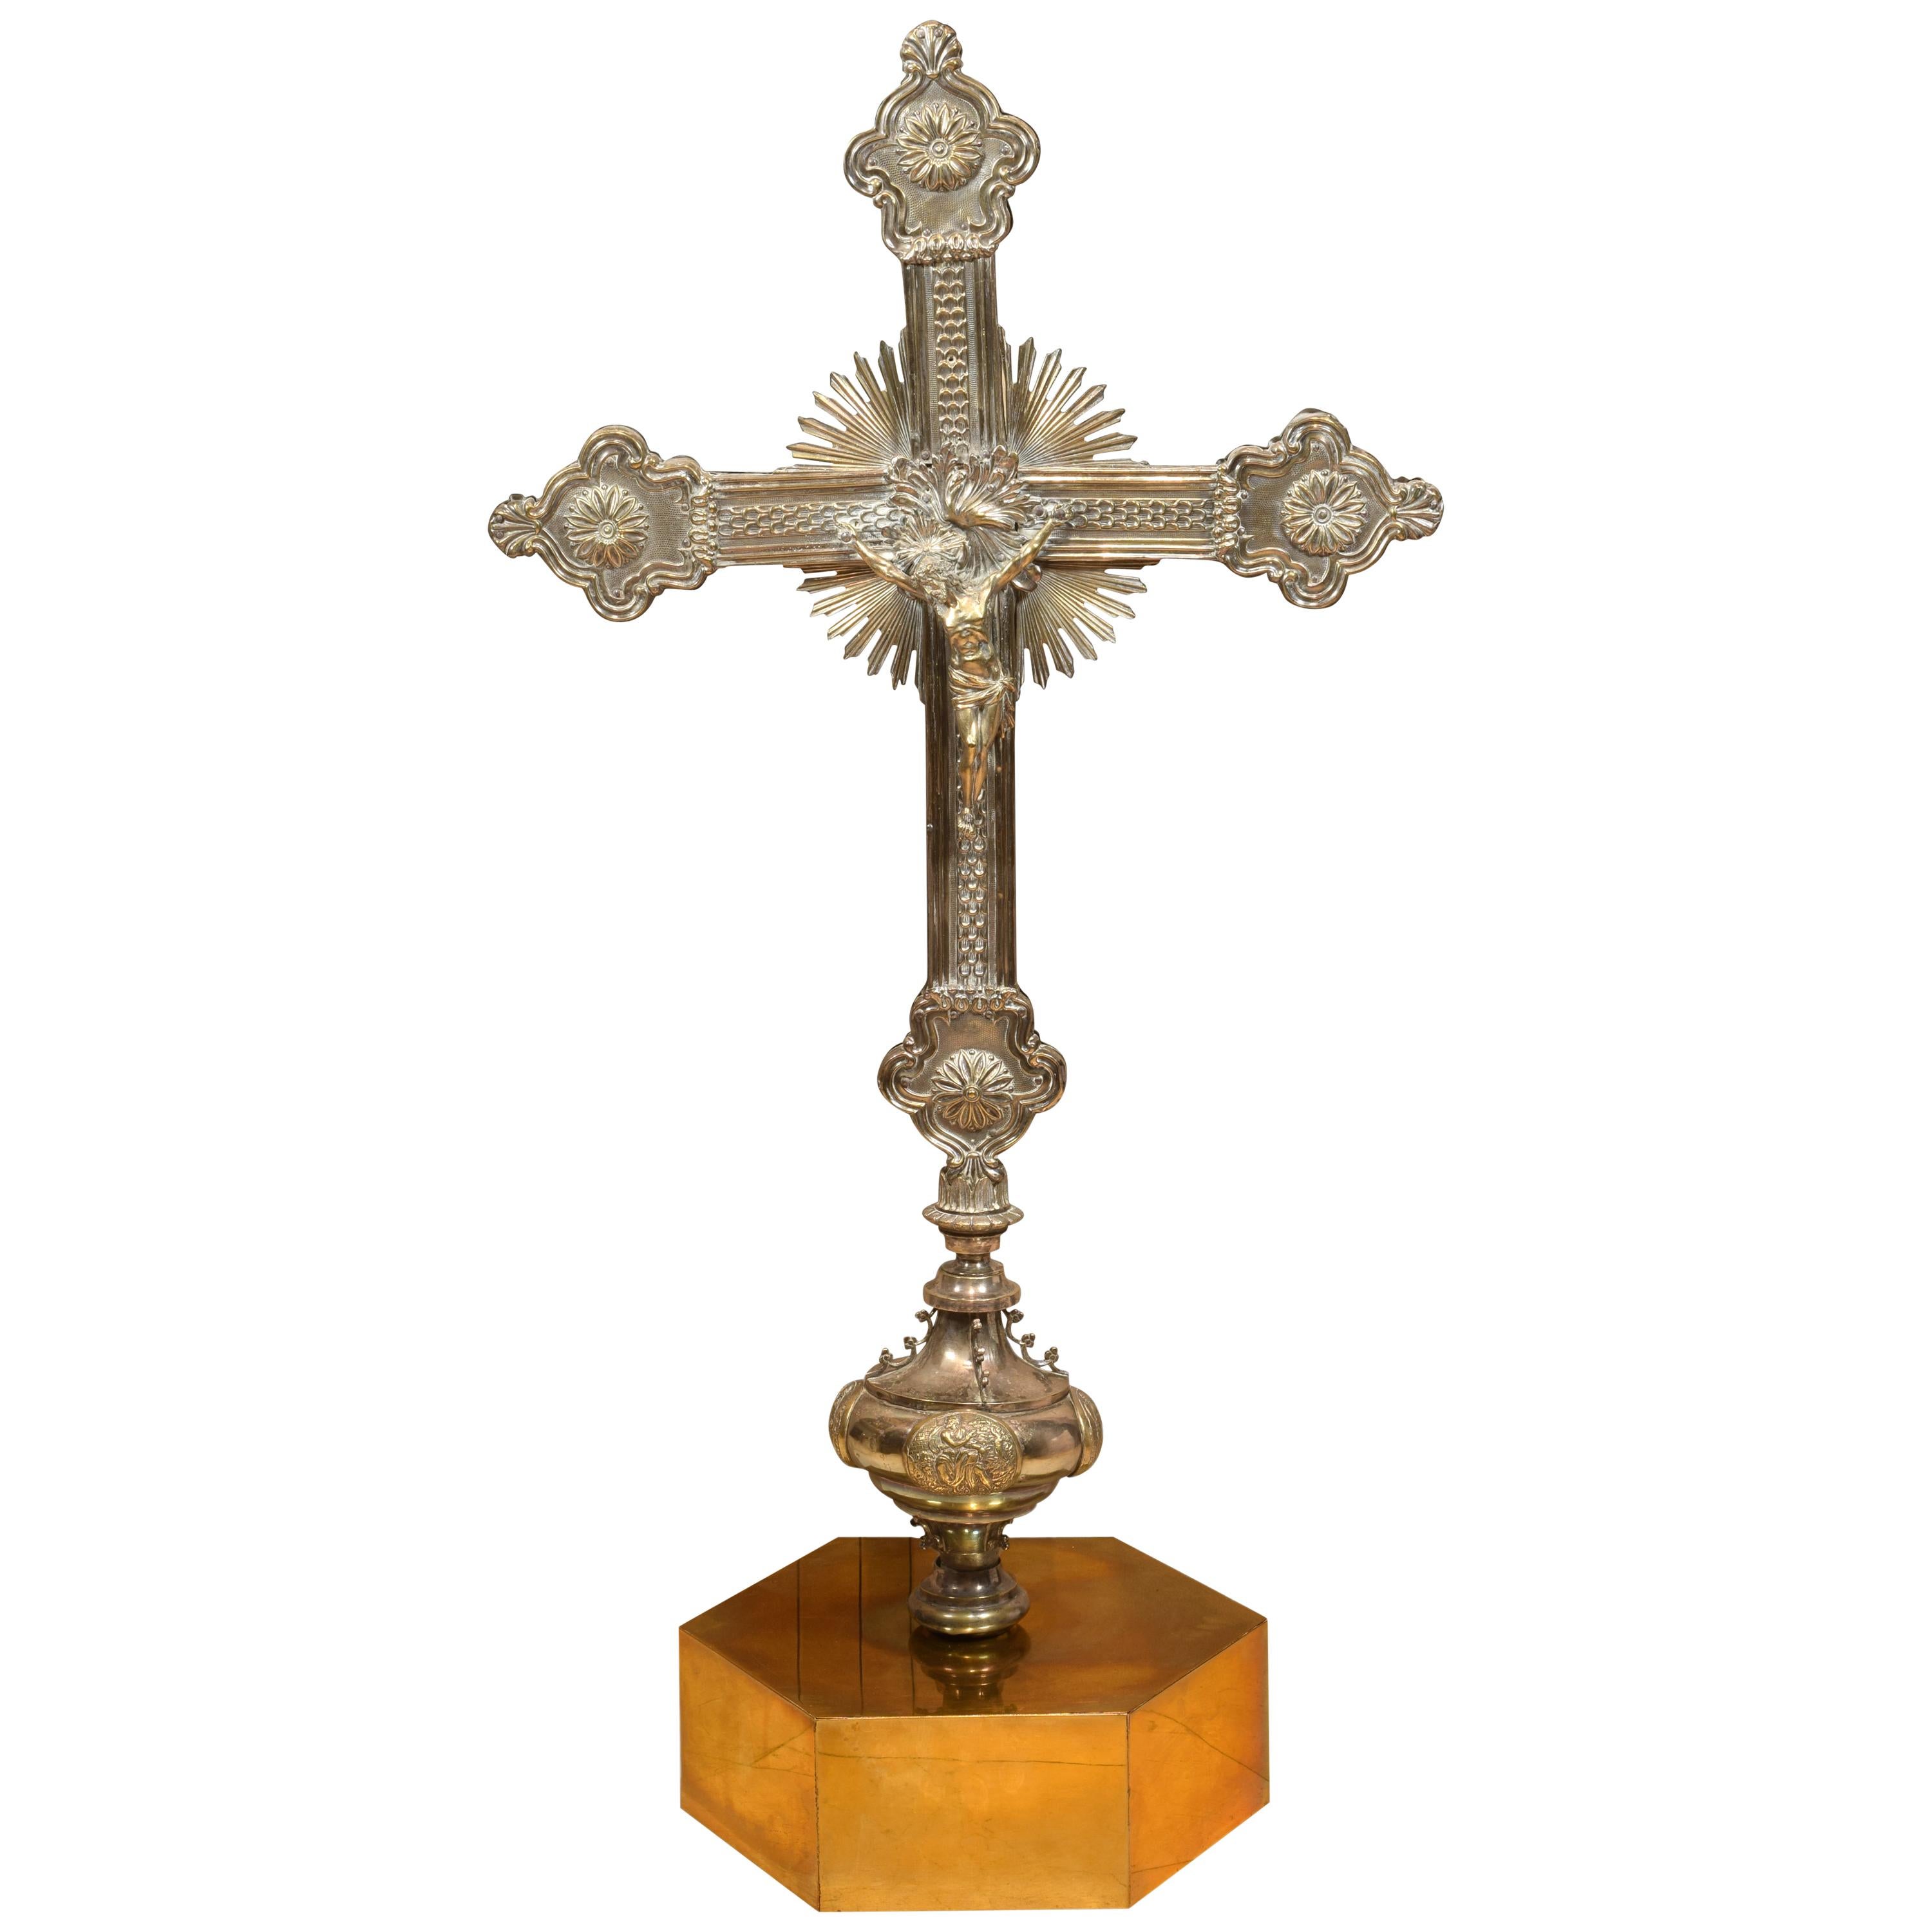 Gilded Bronze Processional Cross Top, 20th Century, after Earlier Models